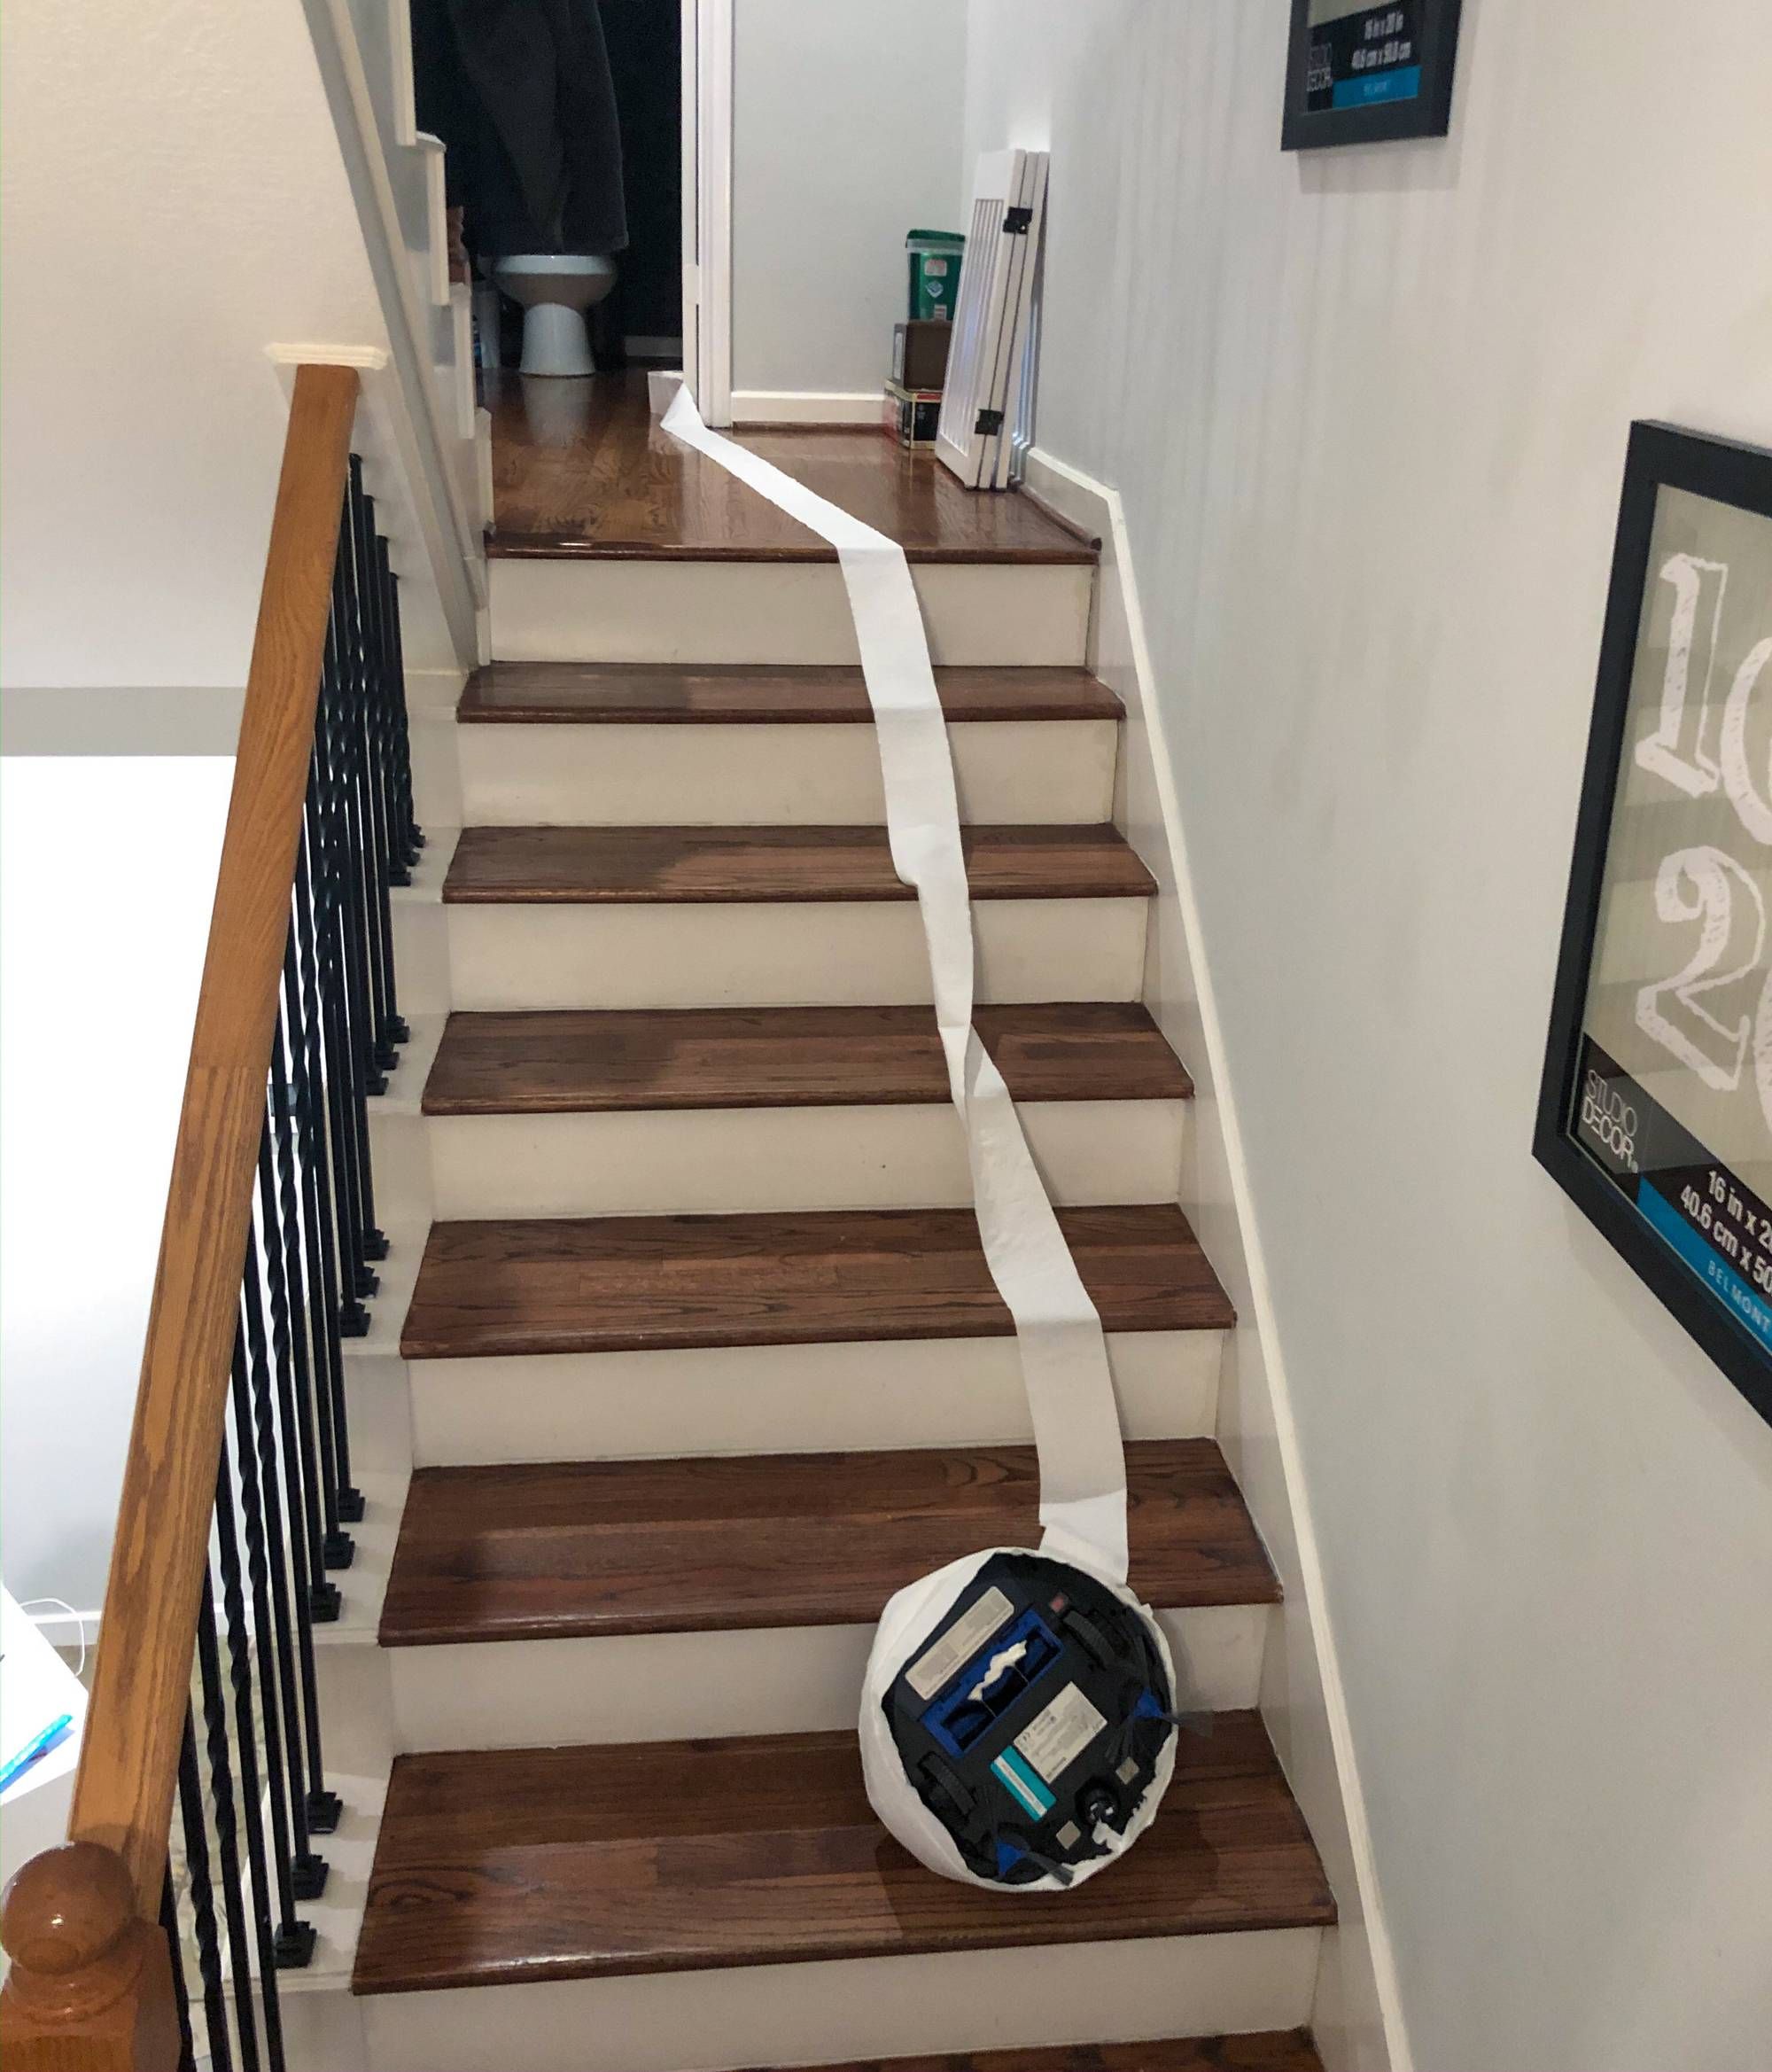 Roomba Suicide in my House last night. It somehow wrapped up its sensors in TP and headed off the edge.